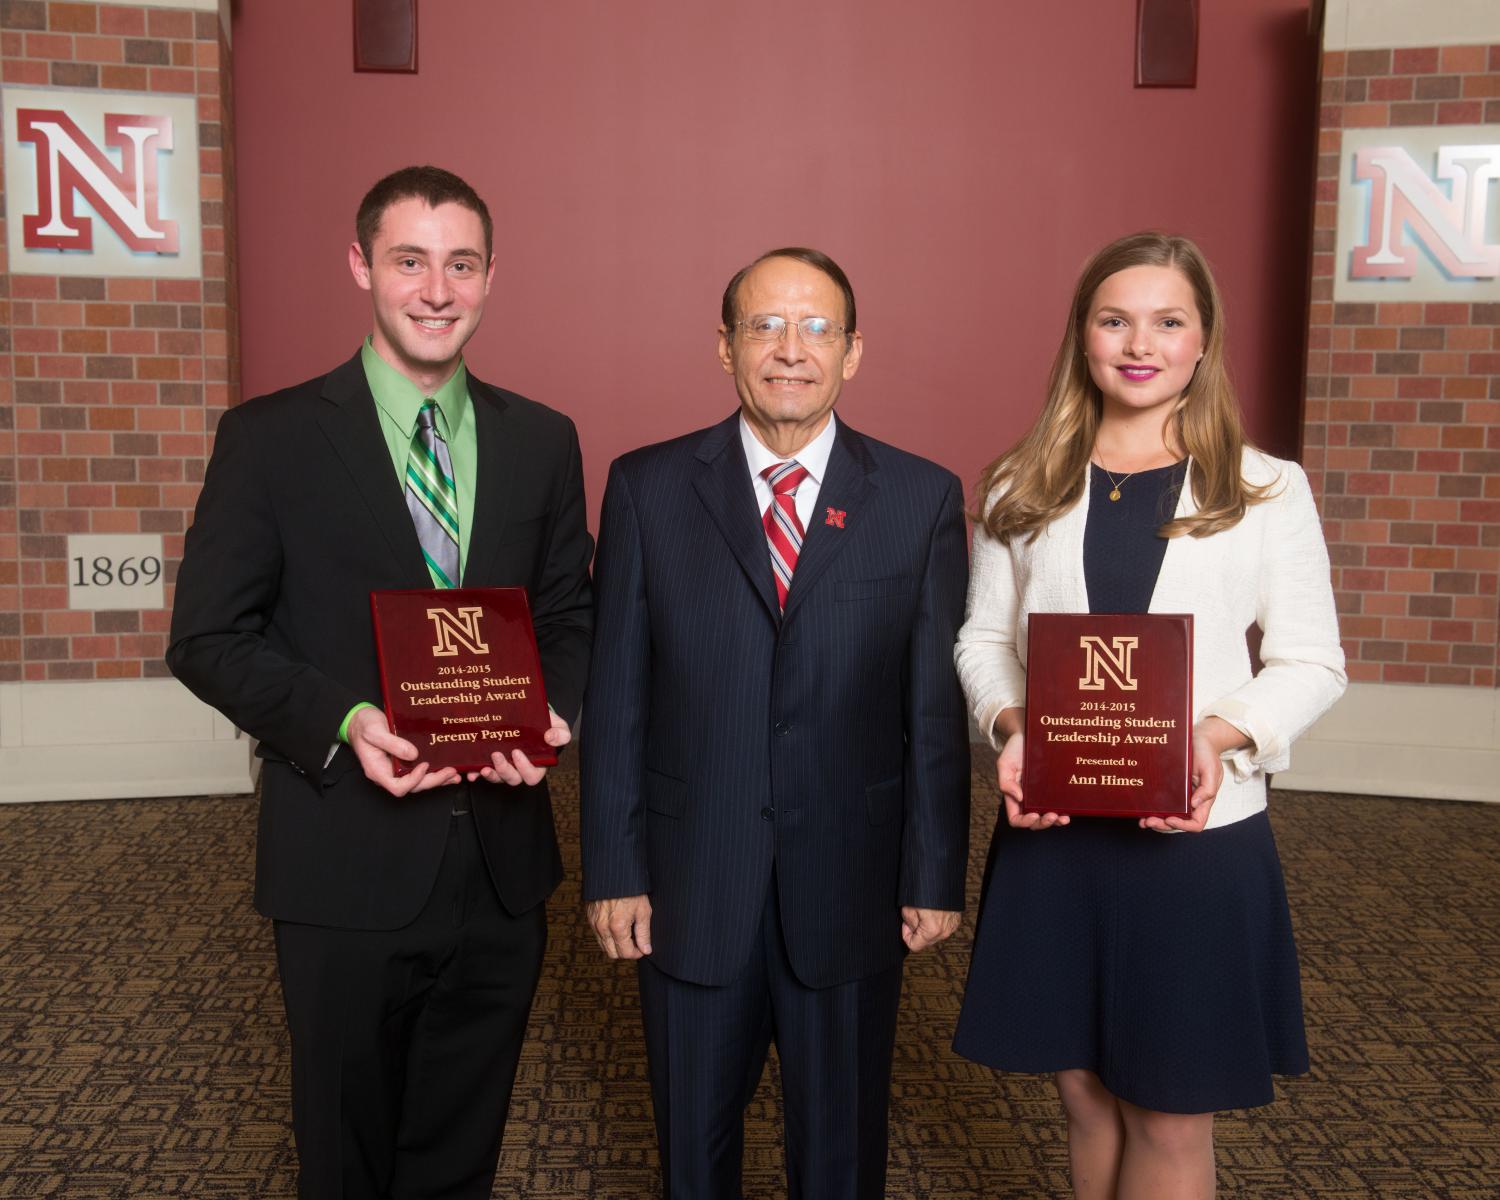 Jeremy Payne and Annie Himes receive Outstanding Student Leadership Awards